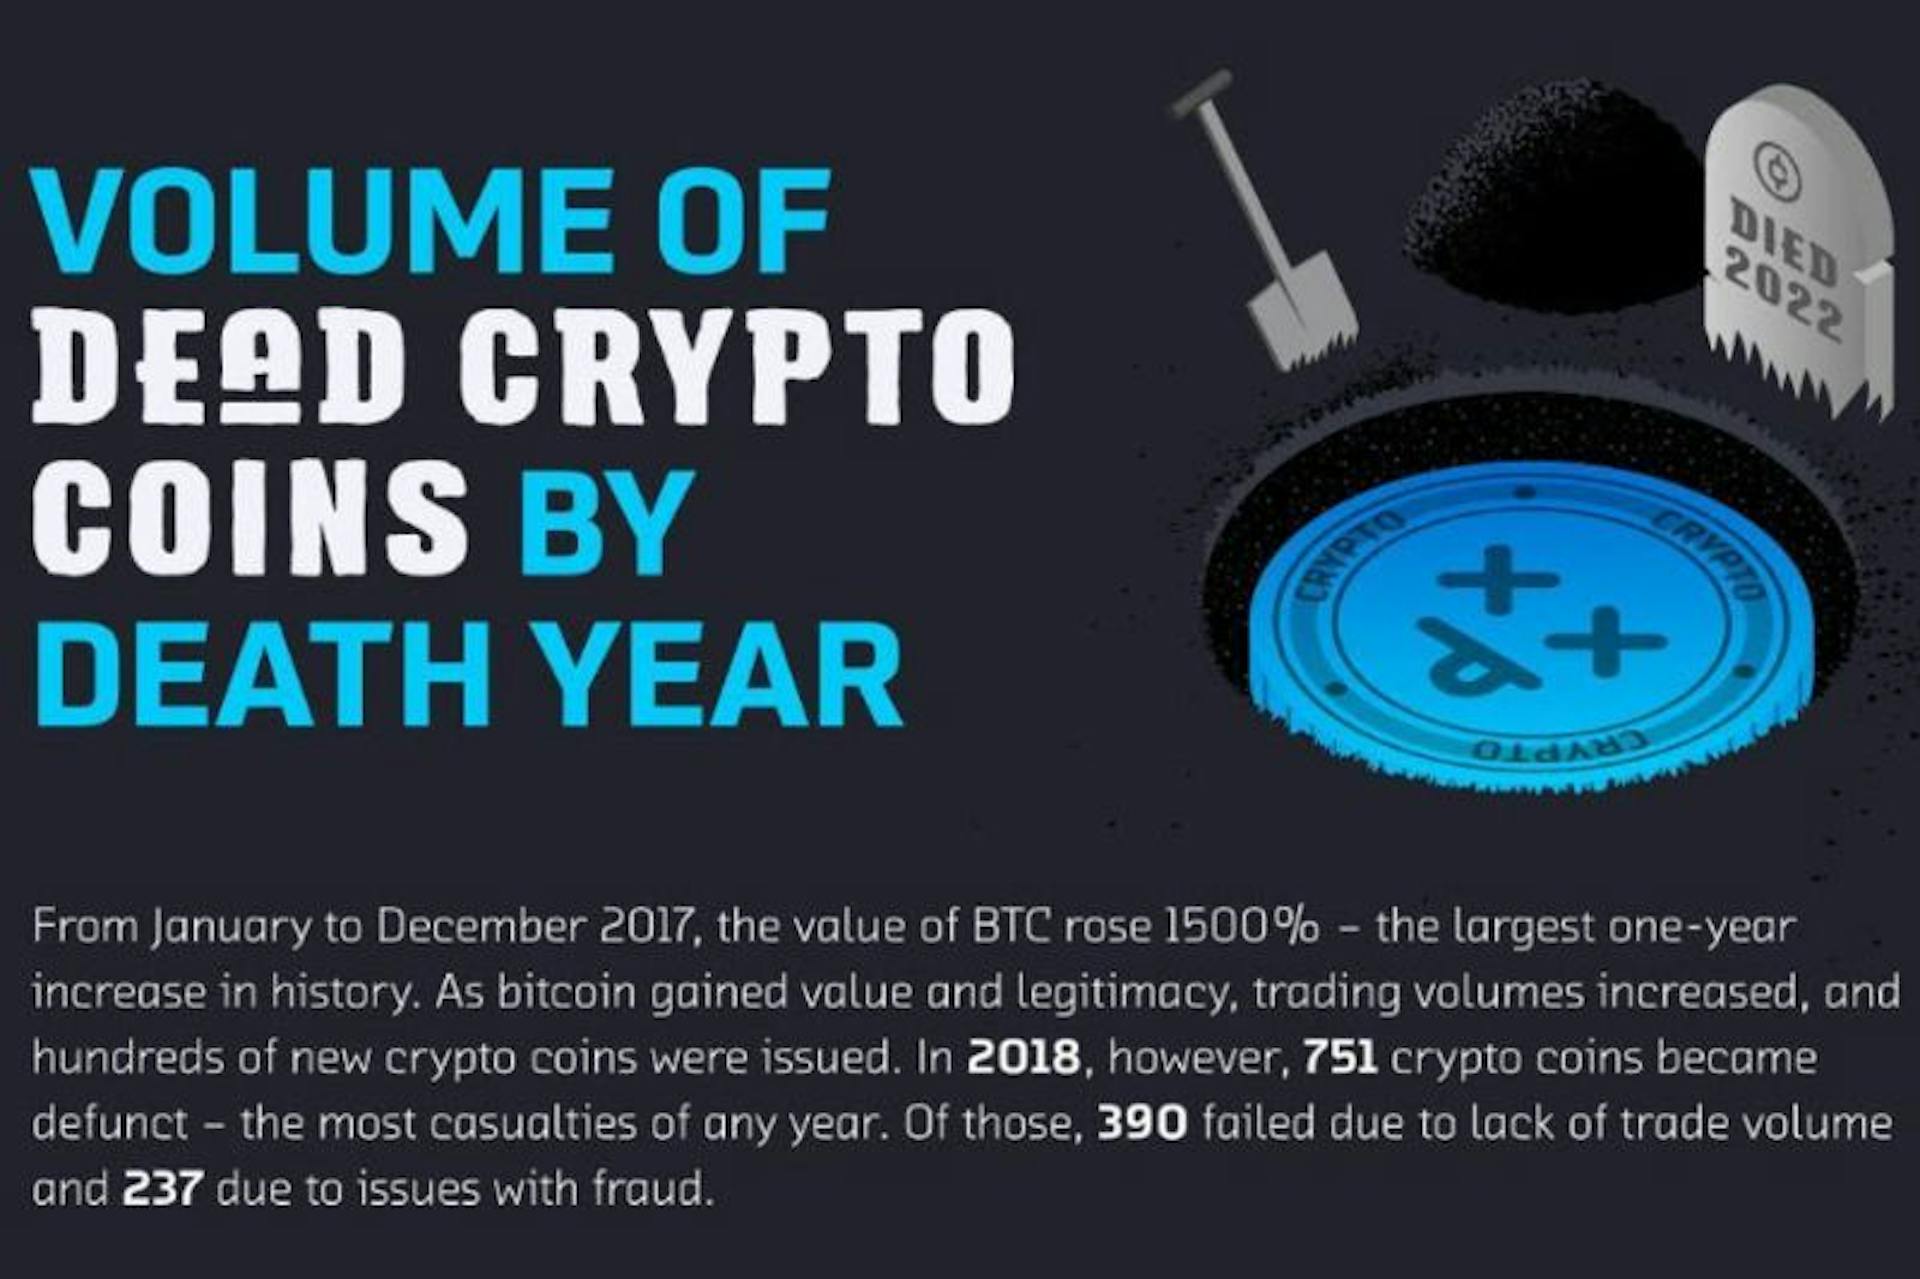 As bitcoin gained value hundreds of new crypto coins were issued.